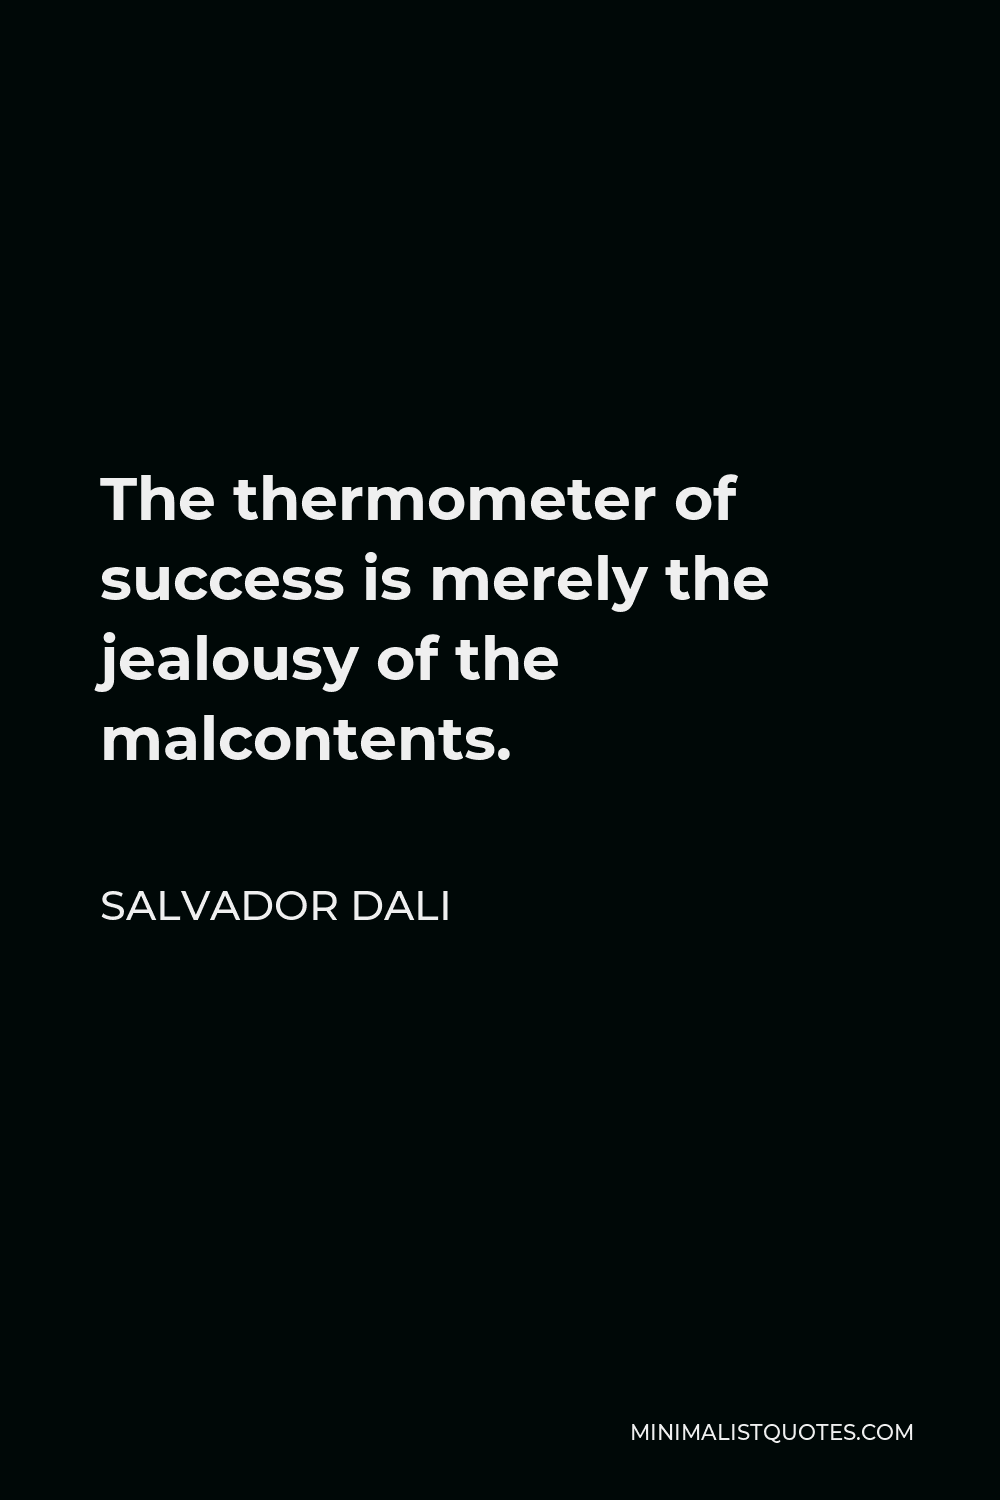 Salvador Dali Quote - The thermometer of success is merely the jealousy of the malcontents.